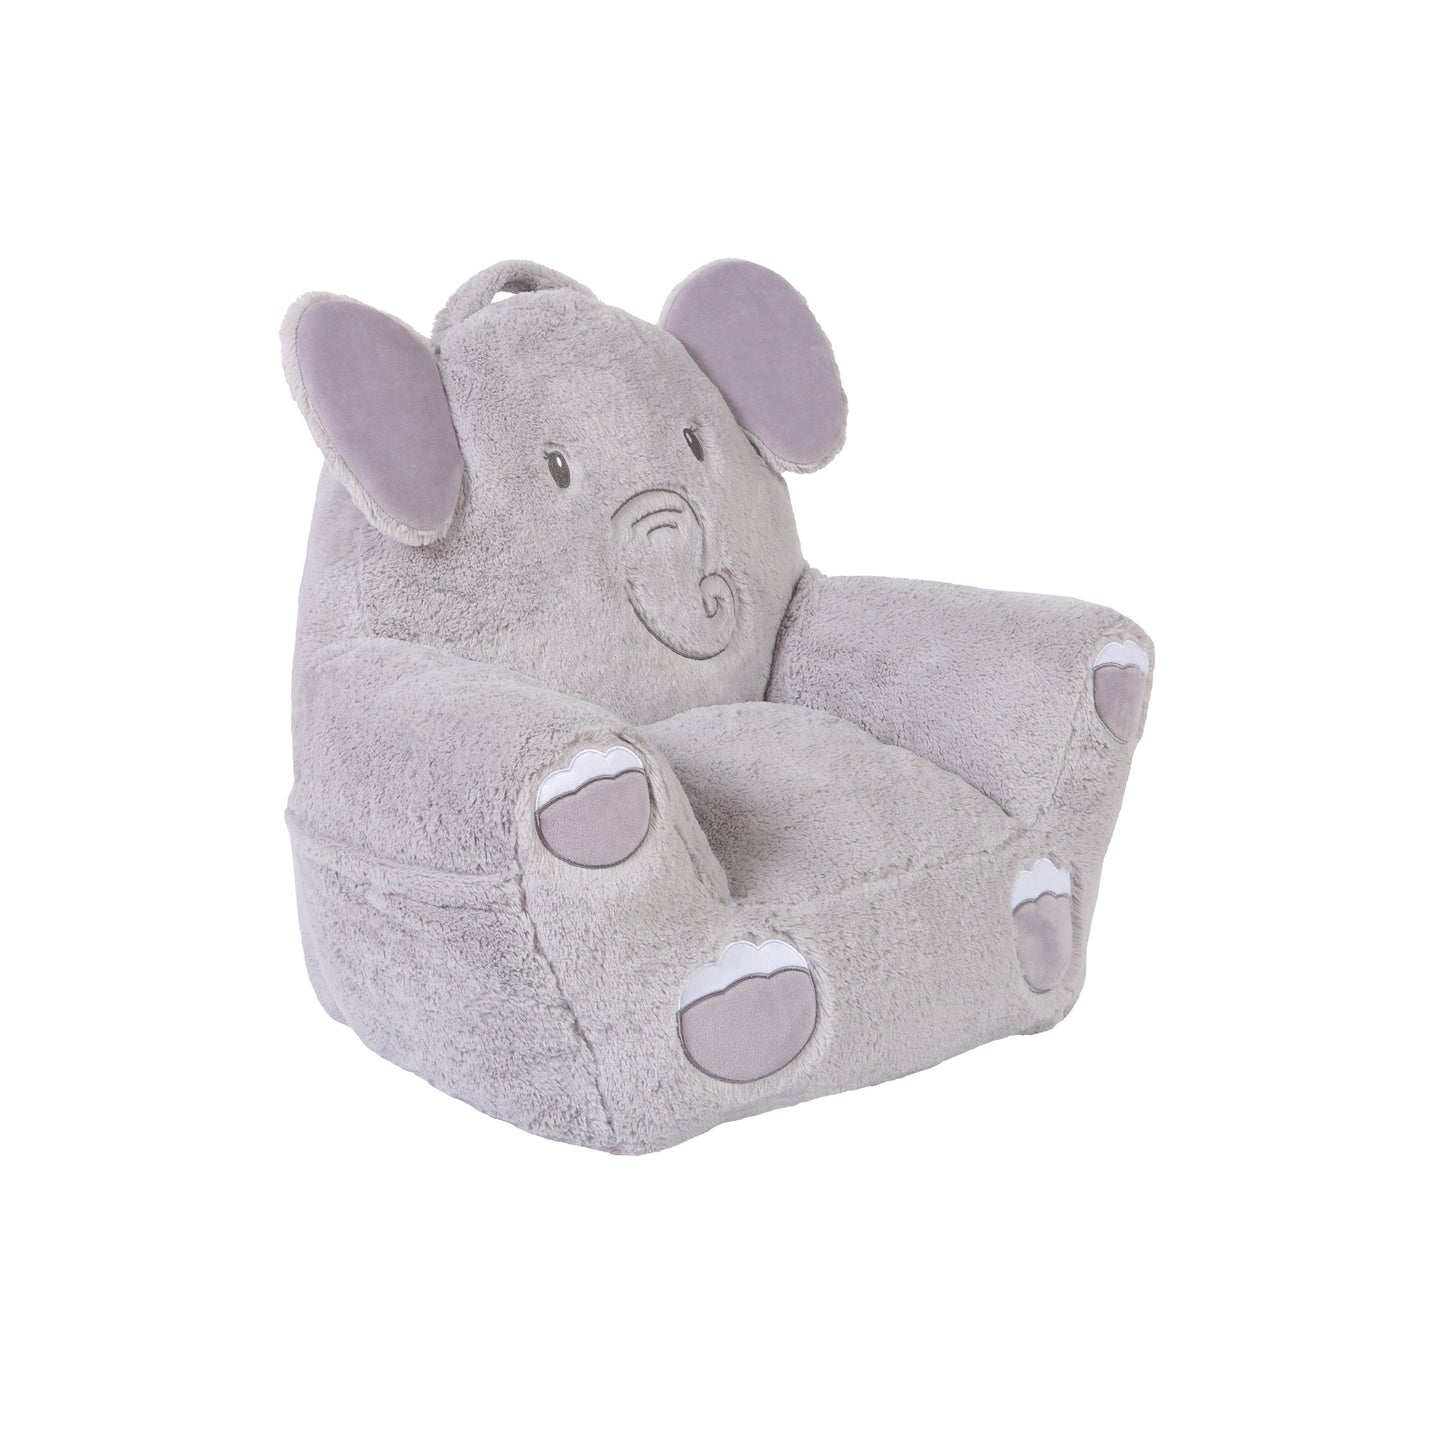 Toddler Plush Elephant Pillow Character Chair by Cuddo Buddies®